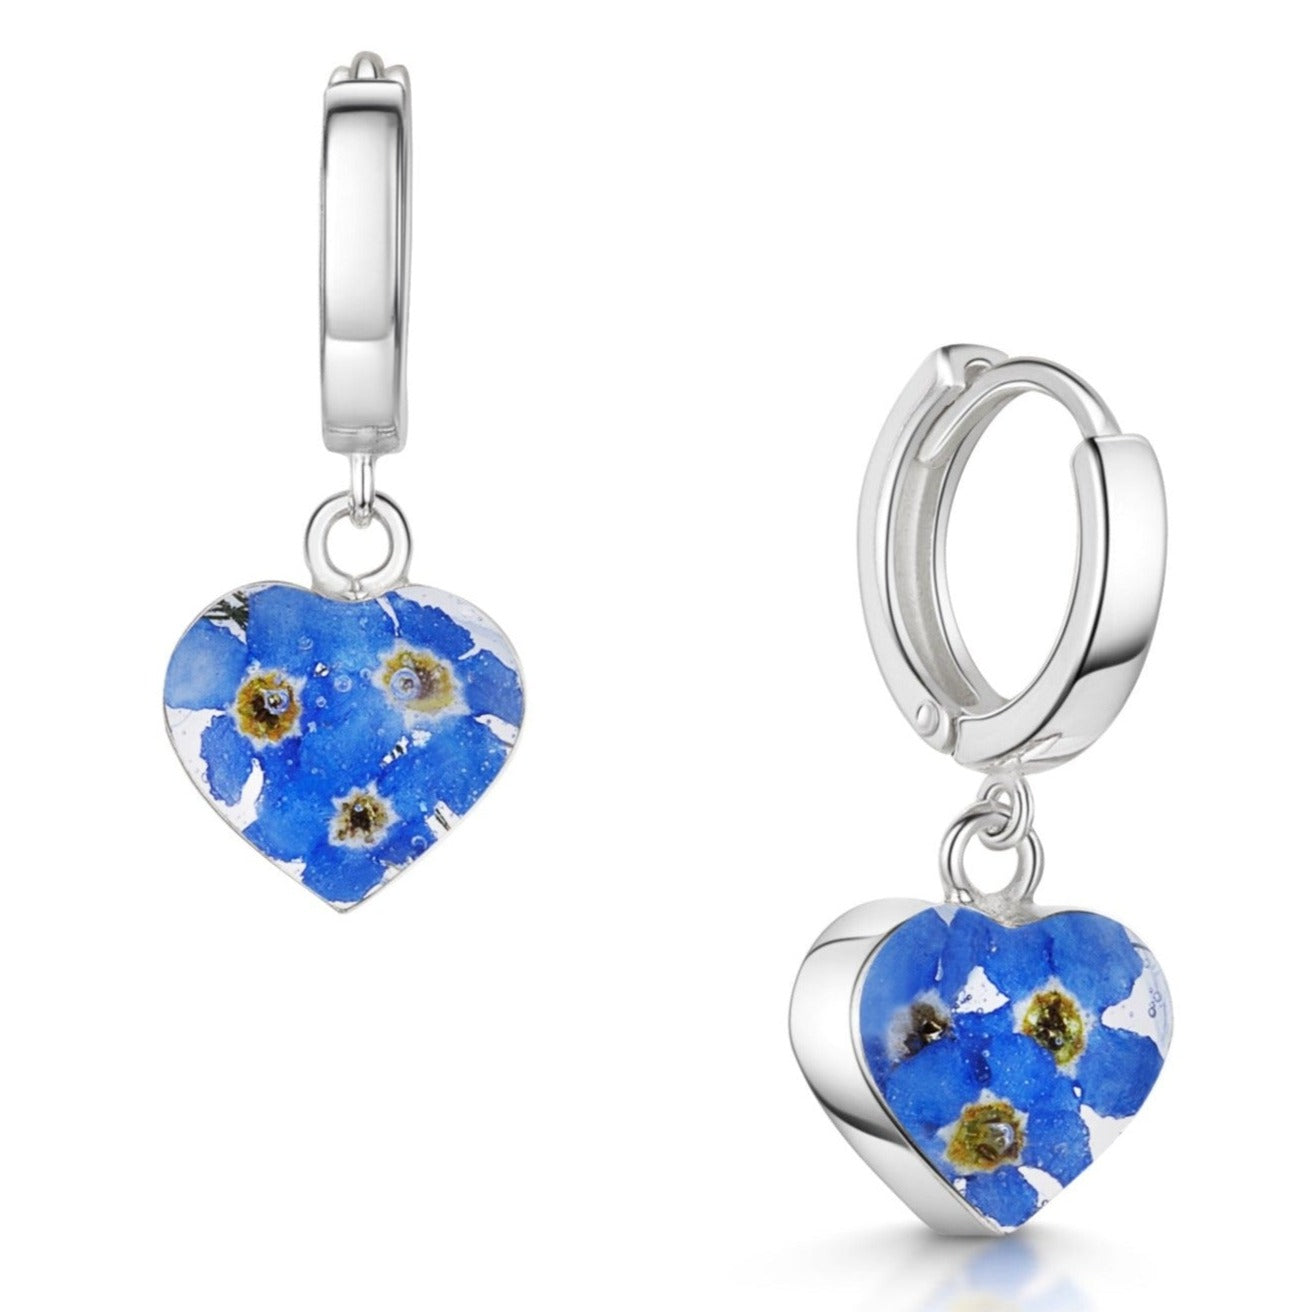 Sterling silver hinged, huggie earrings from which hang a sterling silver heart filled with real forget-me-not flowers set in resin.